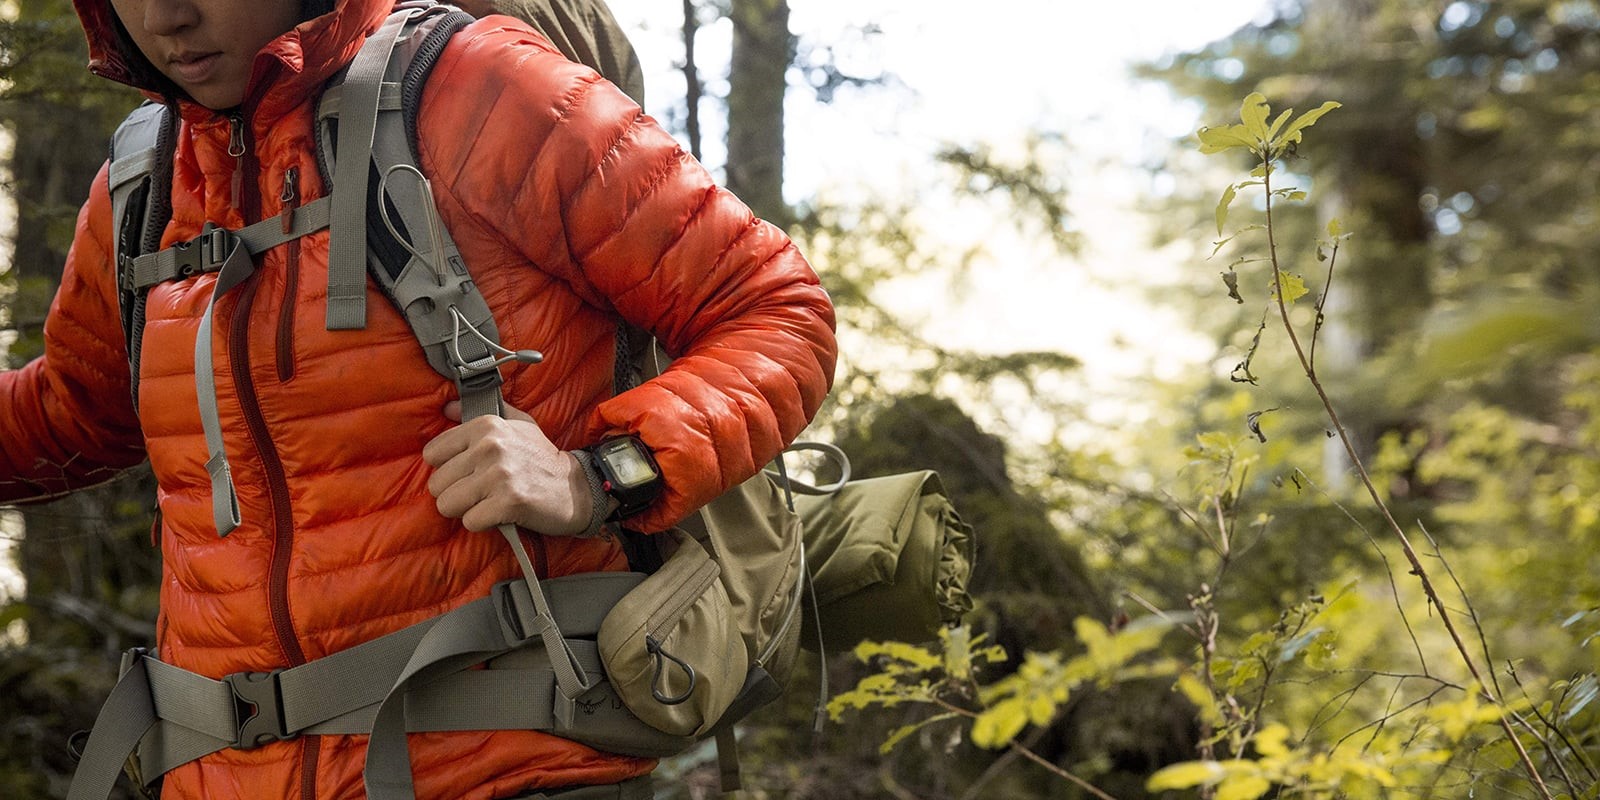 Hiking Clothes: What to Wear Hiking | REI Co-op